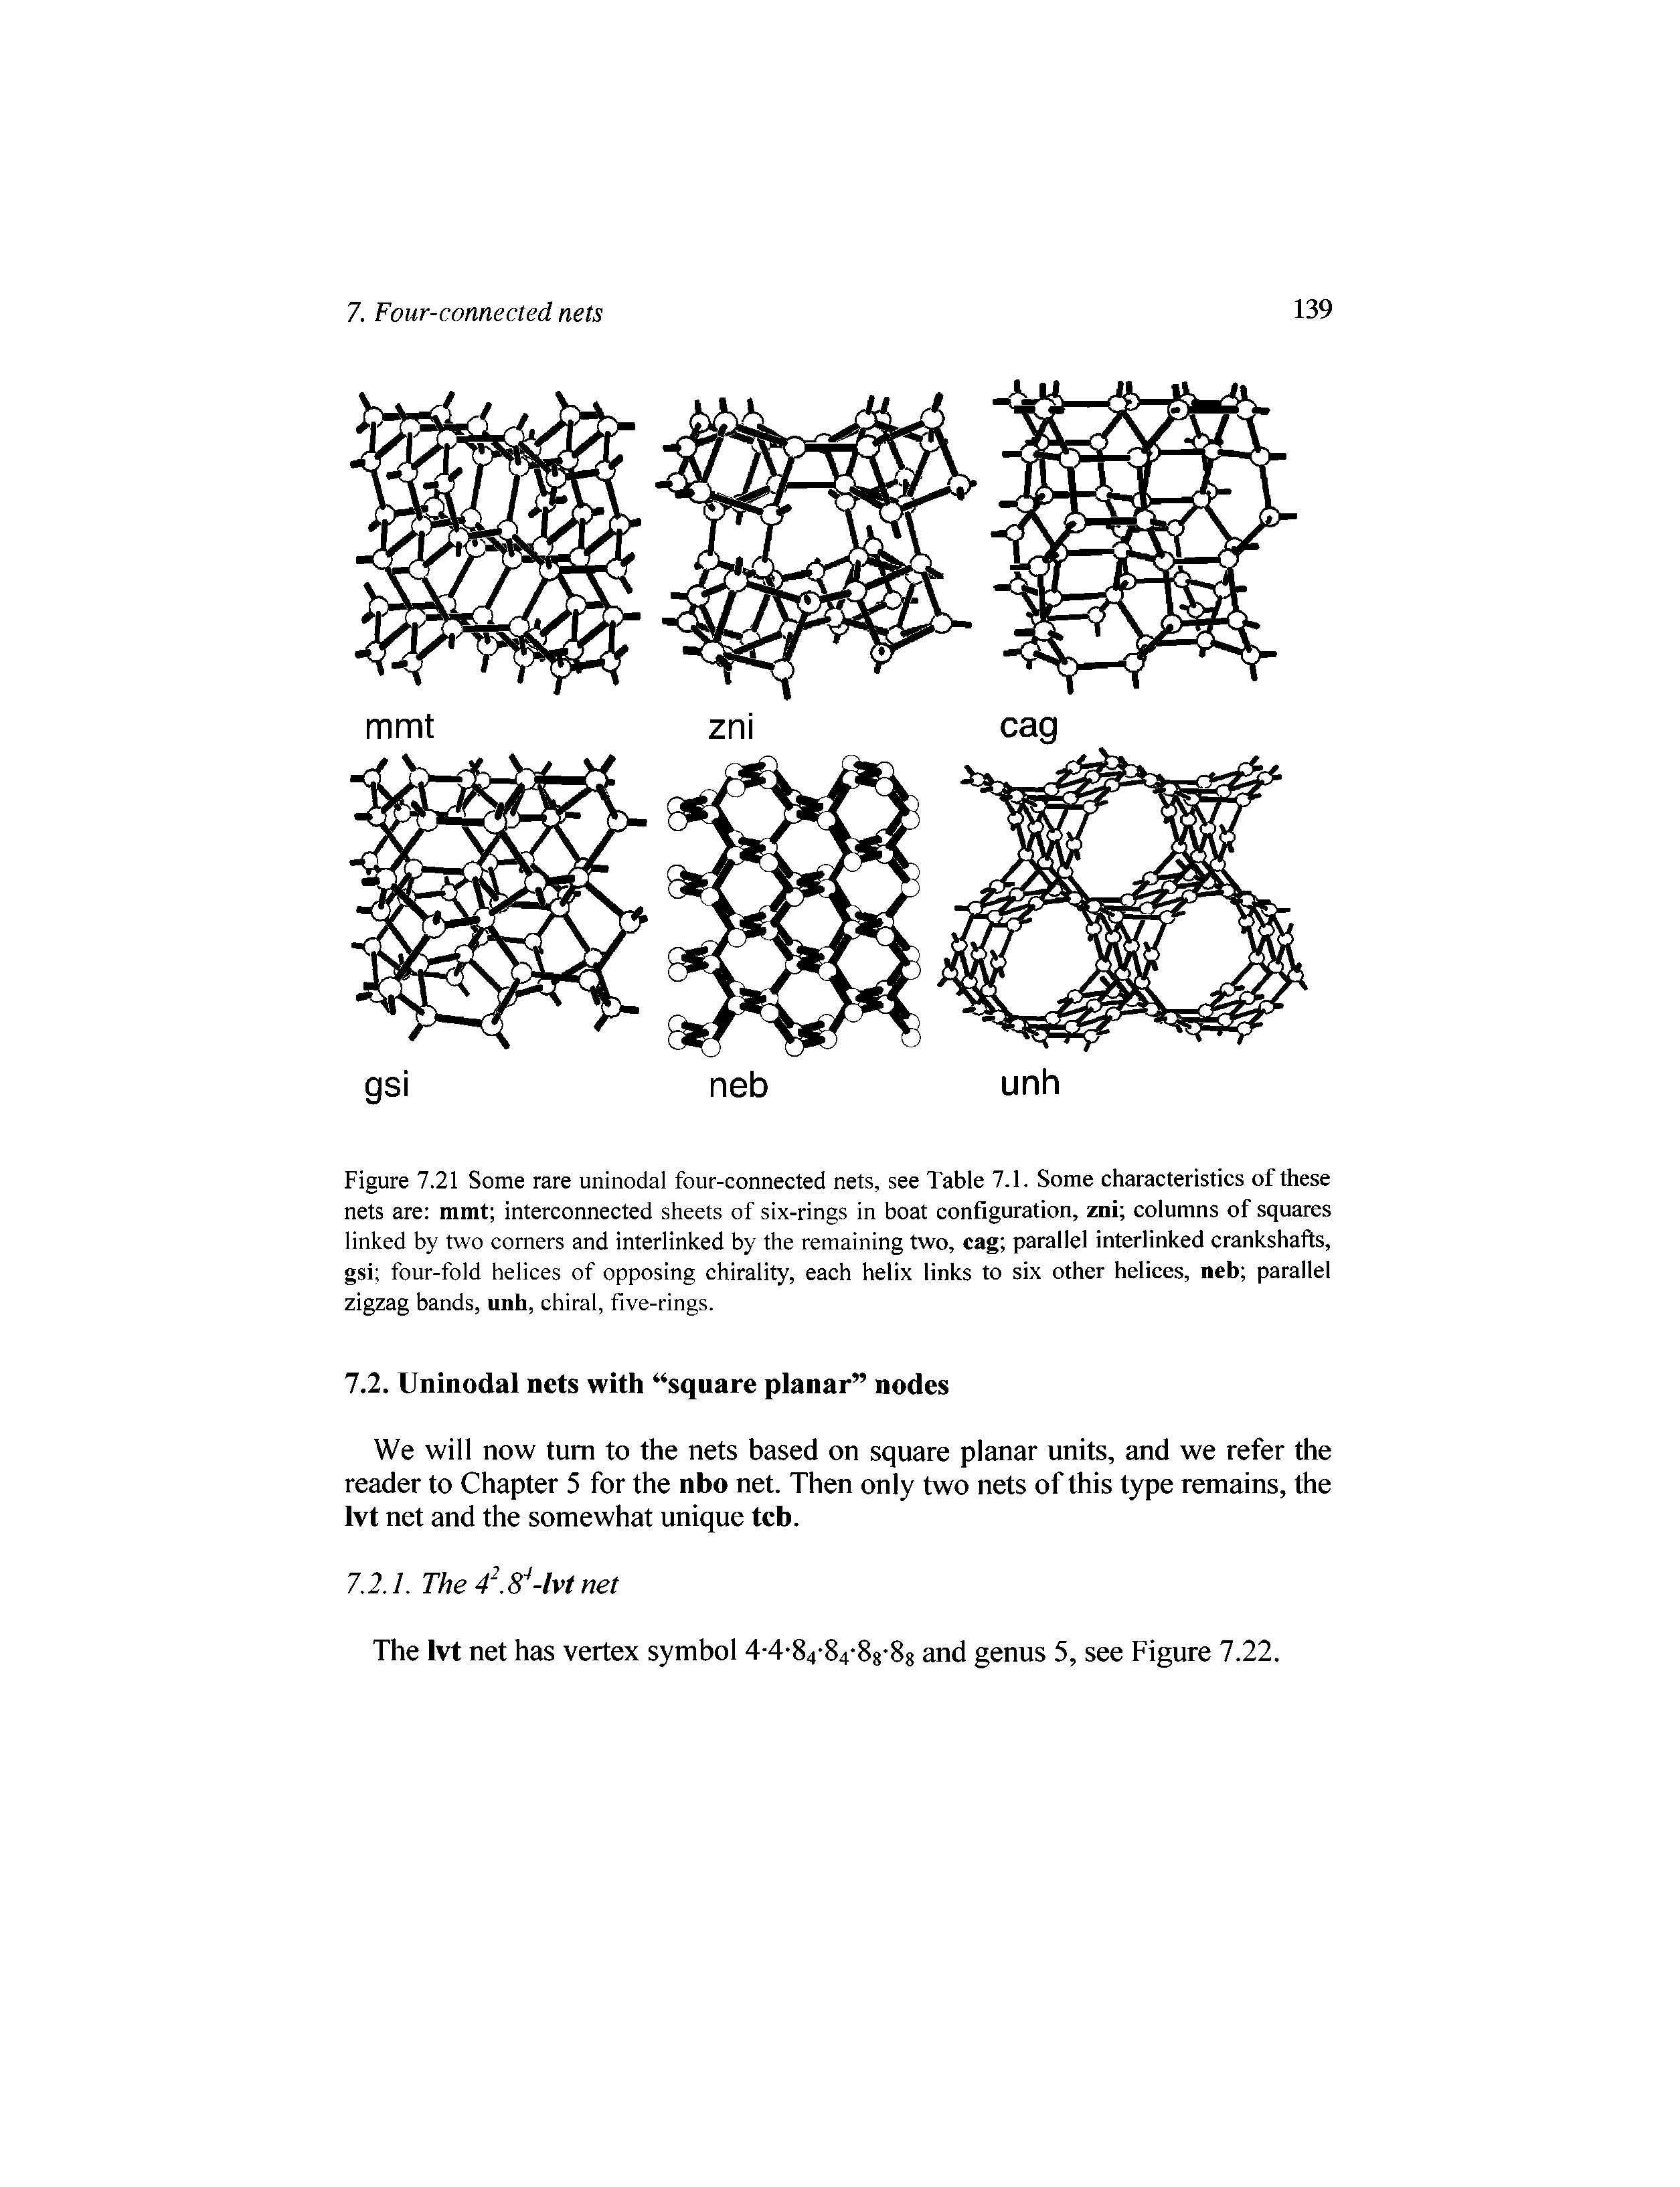 Figure 7.21 Some rare uninodal four-connected nets, see Table 7.1. Some characteristics of these nets are mmt interconnected sheets of six-rings in boat configuration, zni columns of squares linked by two corners and interlinked by the remaining two, cag parallel interlinked crankshafts, gsi four-fold helices of opposing chirality, each helix links to six other helices, neb parallel zigzag bands, unh, chiral, five-rings.